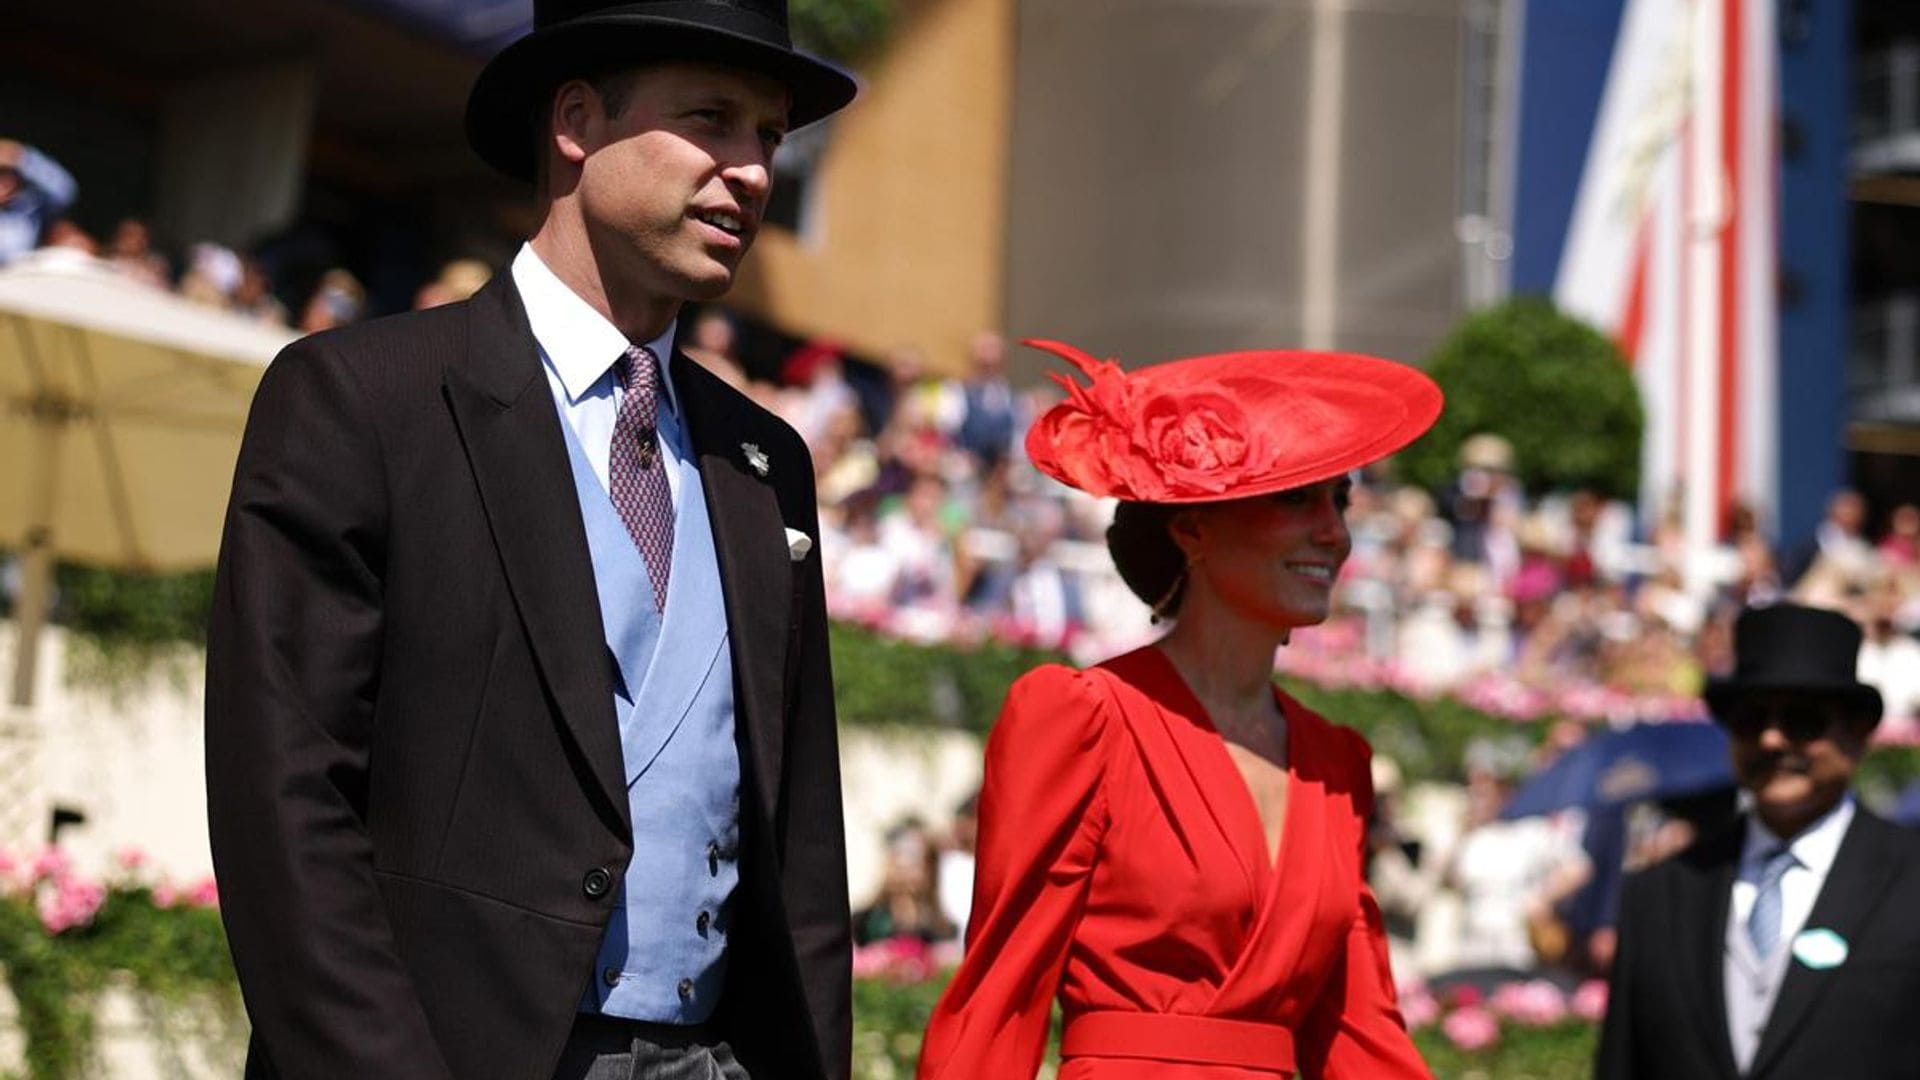 The lady in red! The Princess of Wales looks radiant at Royal Ascot